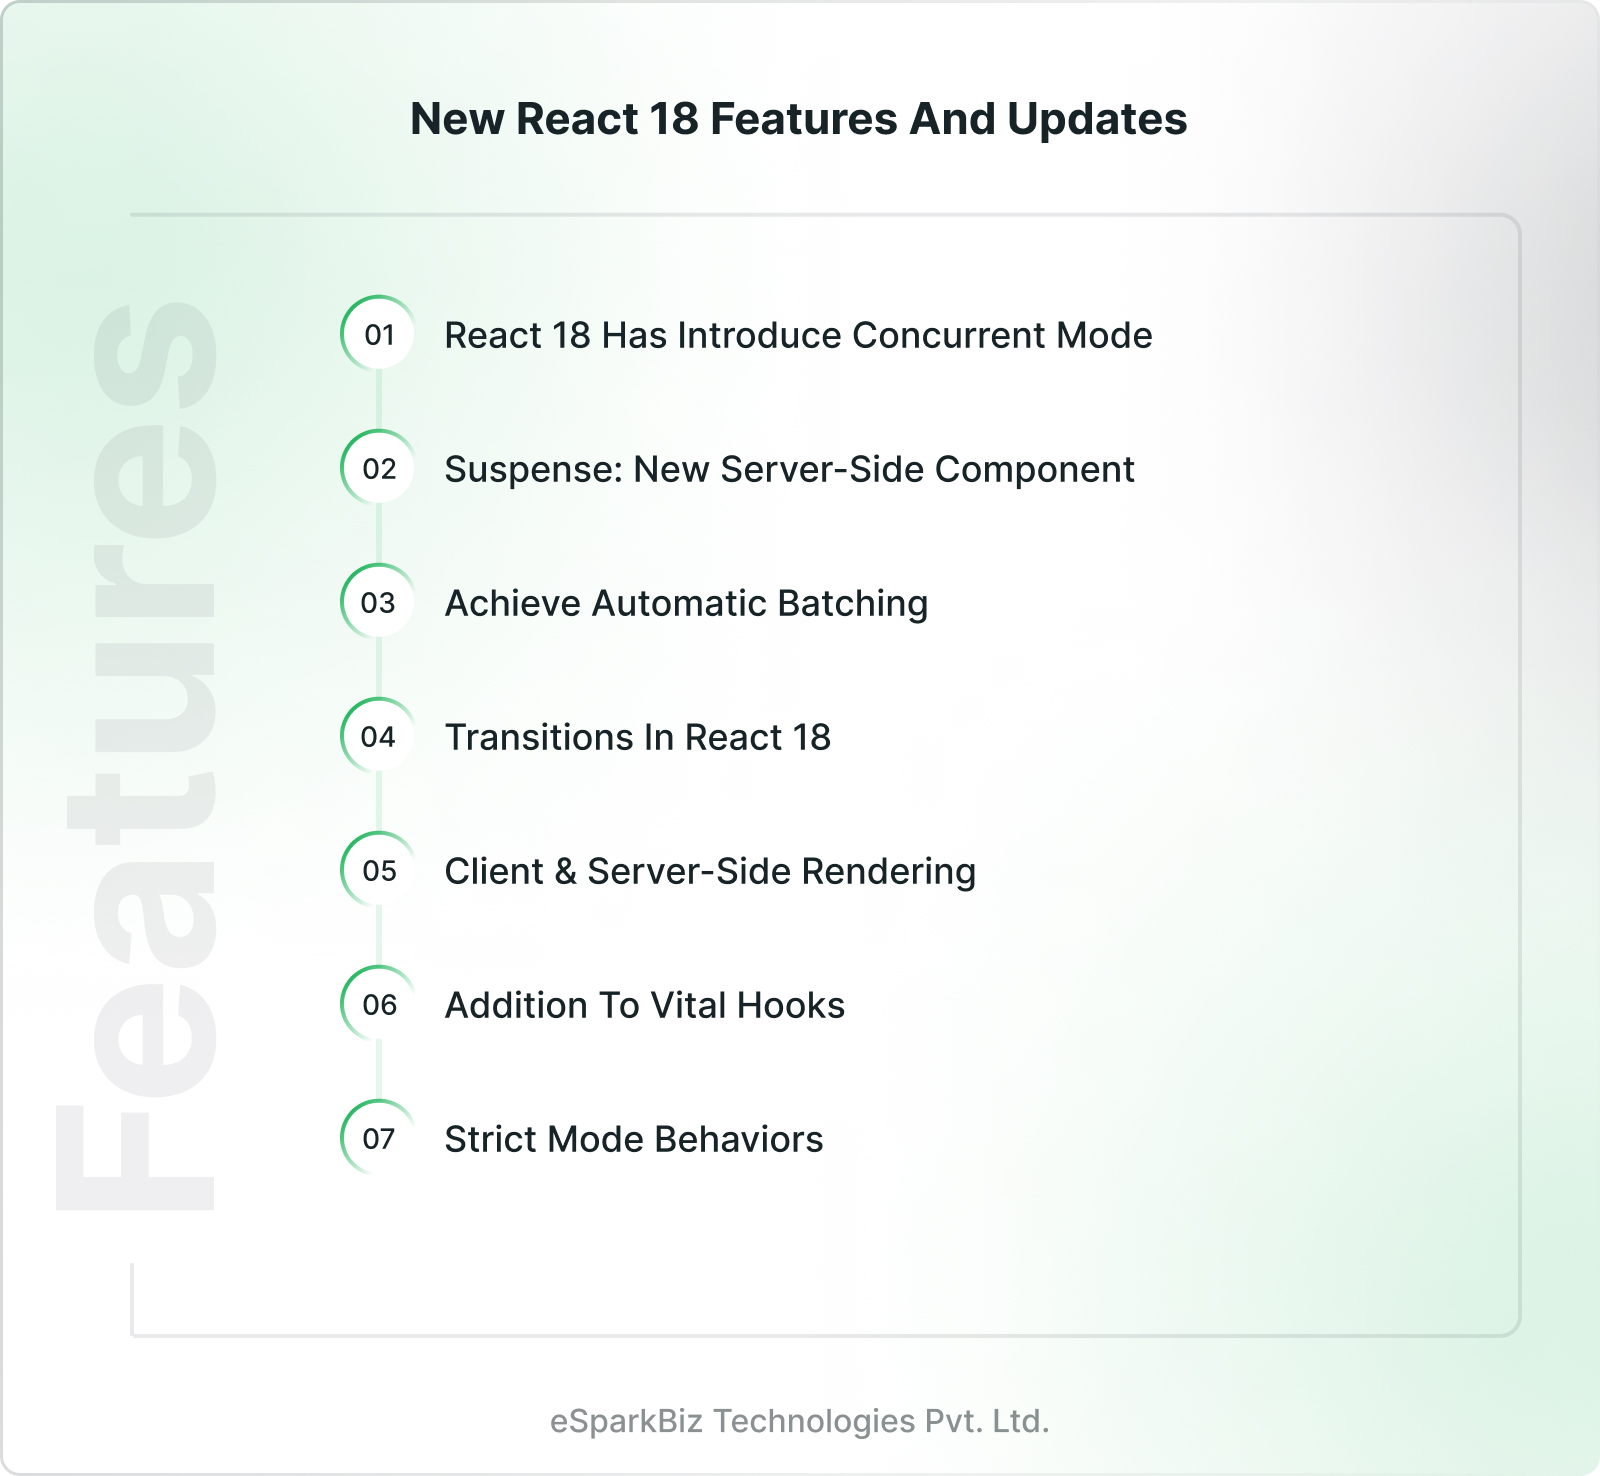 New React 18 Features and Updates